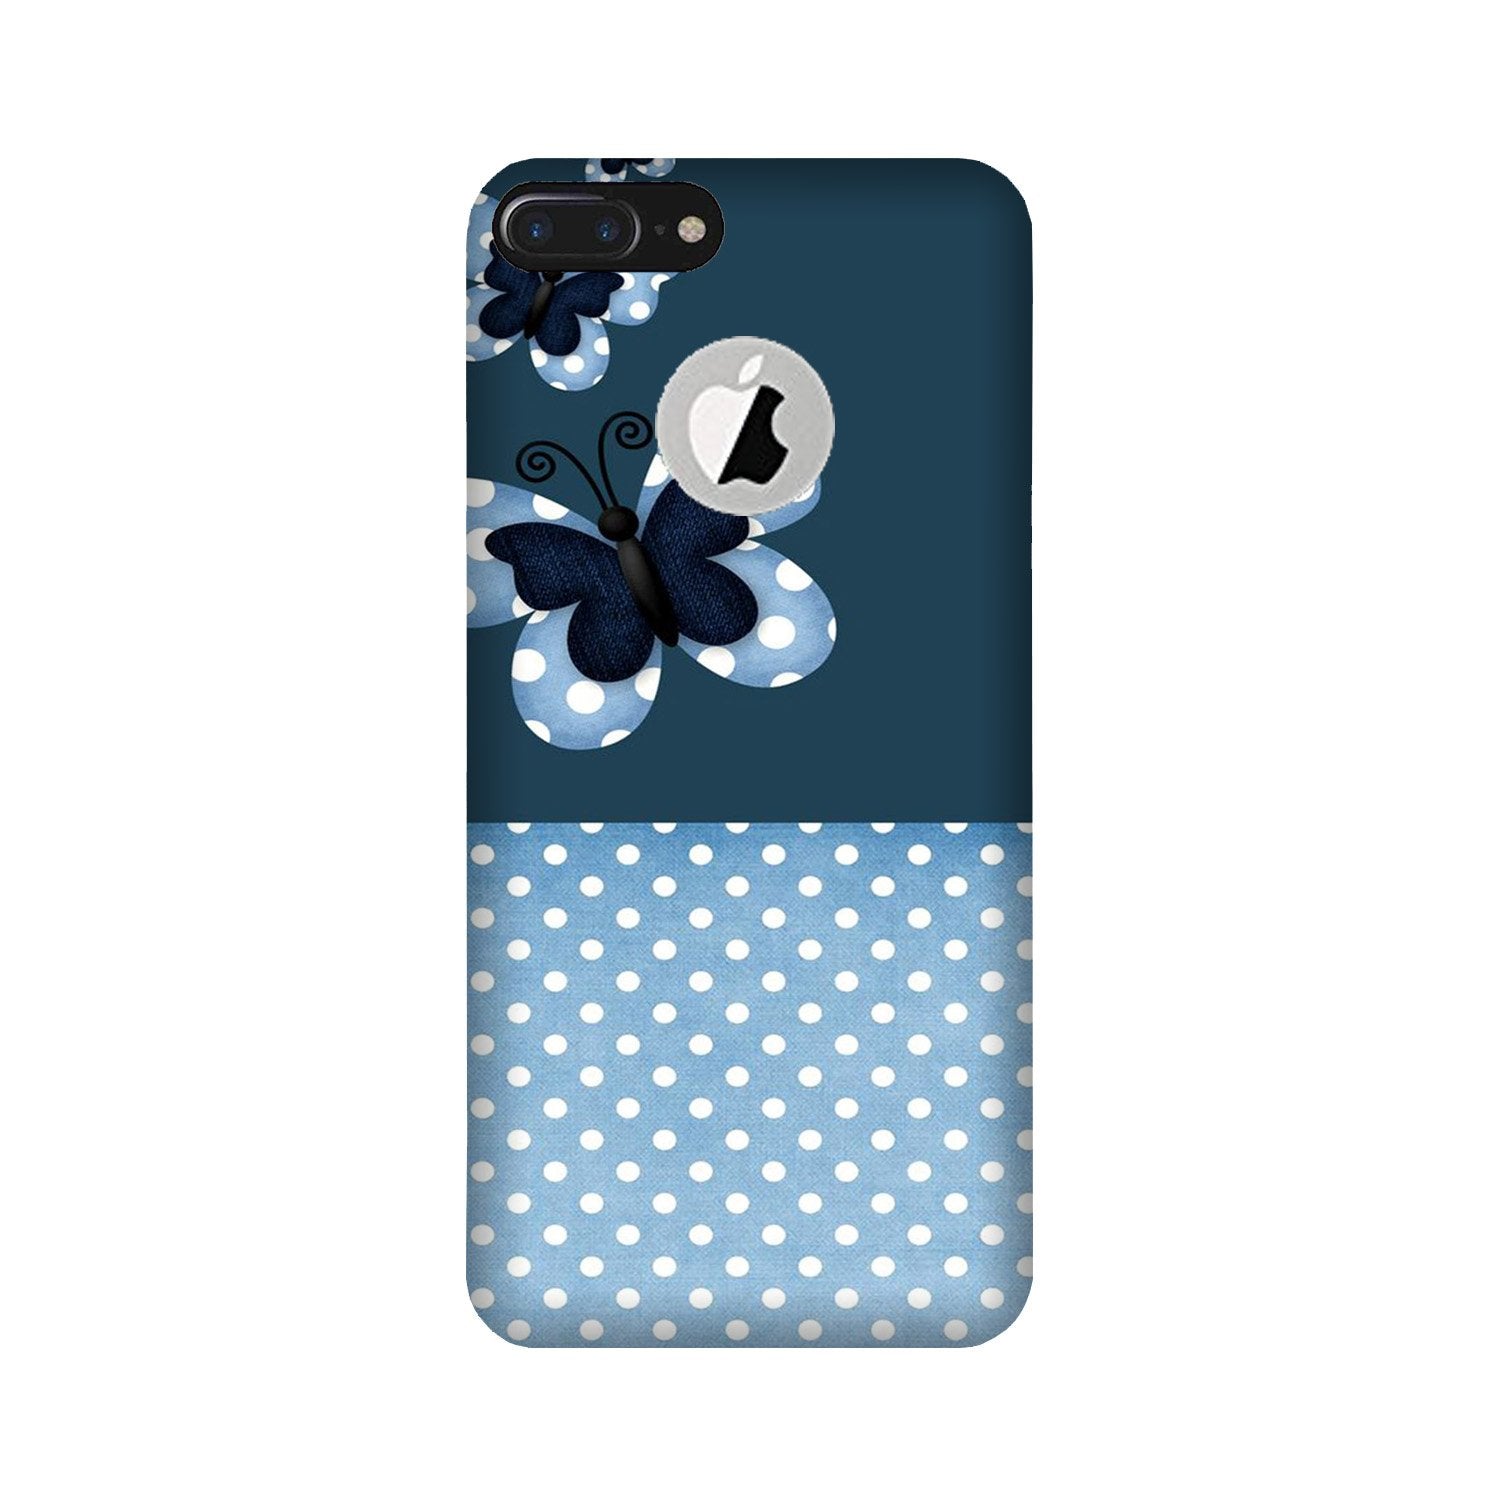 White dots Butterfly Case for iPhone 7 Plus logo cut